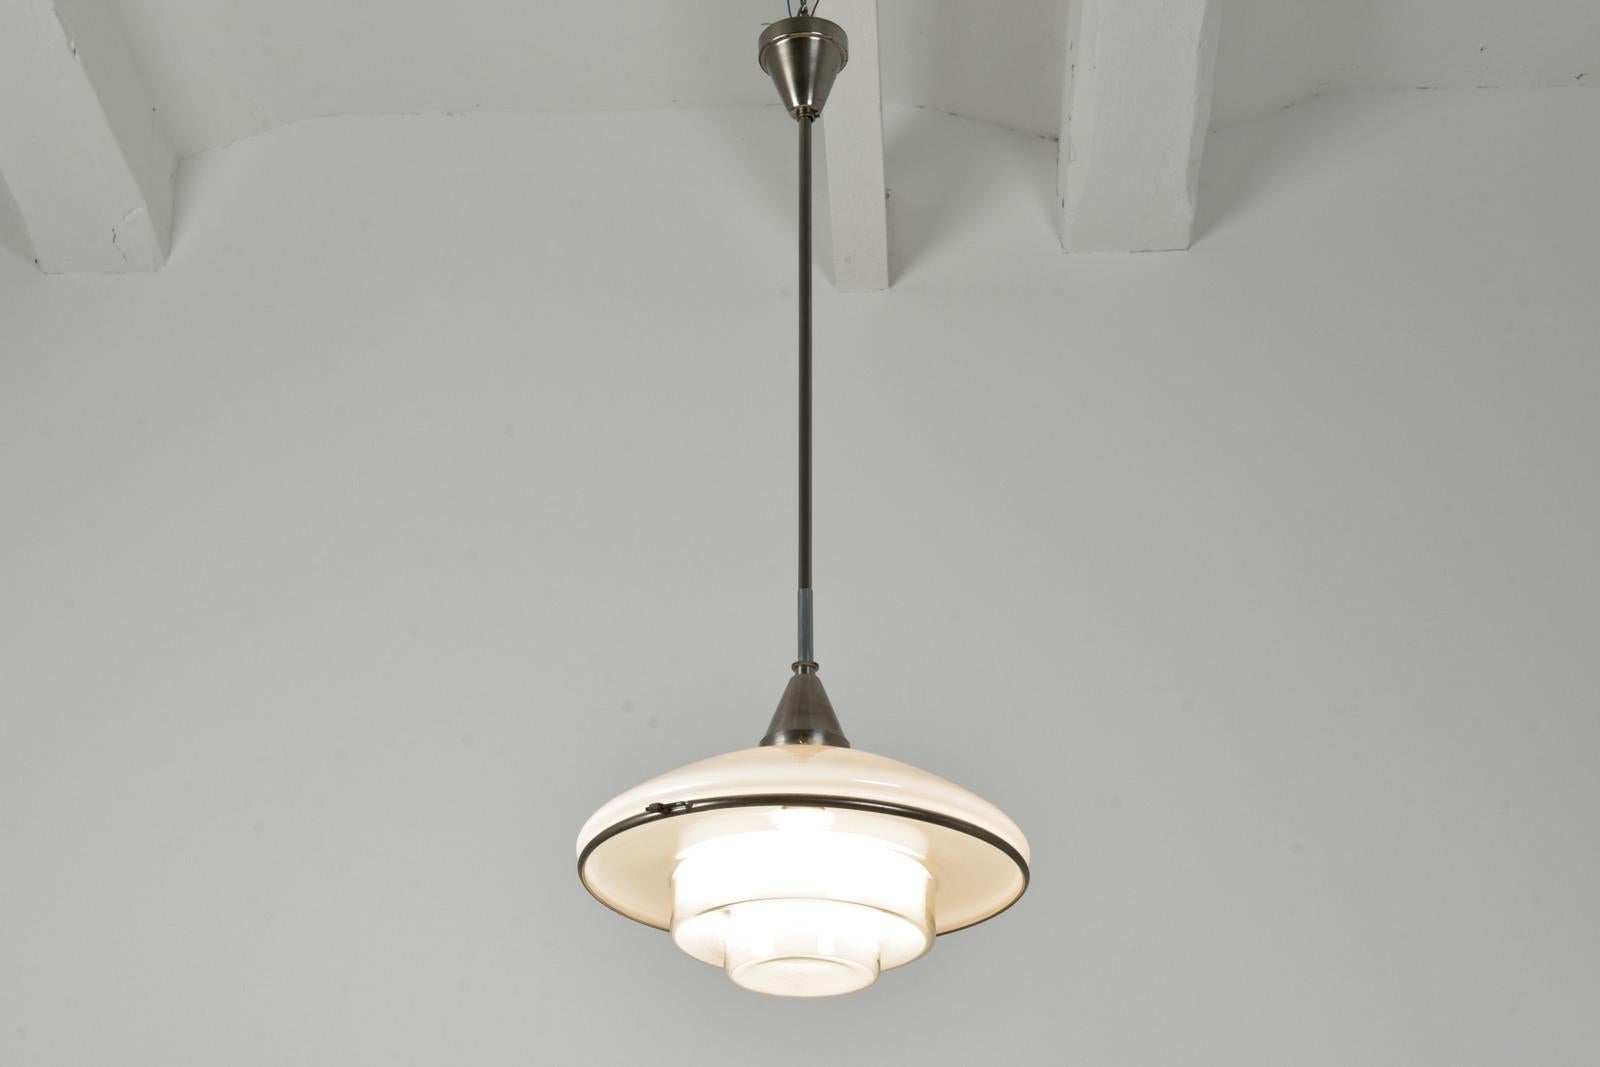 Mid-20th Century Pendant Lamp by C. F. Otto Müller for SISTRAH, Germany - 1931 For Sale